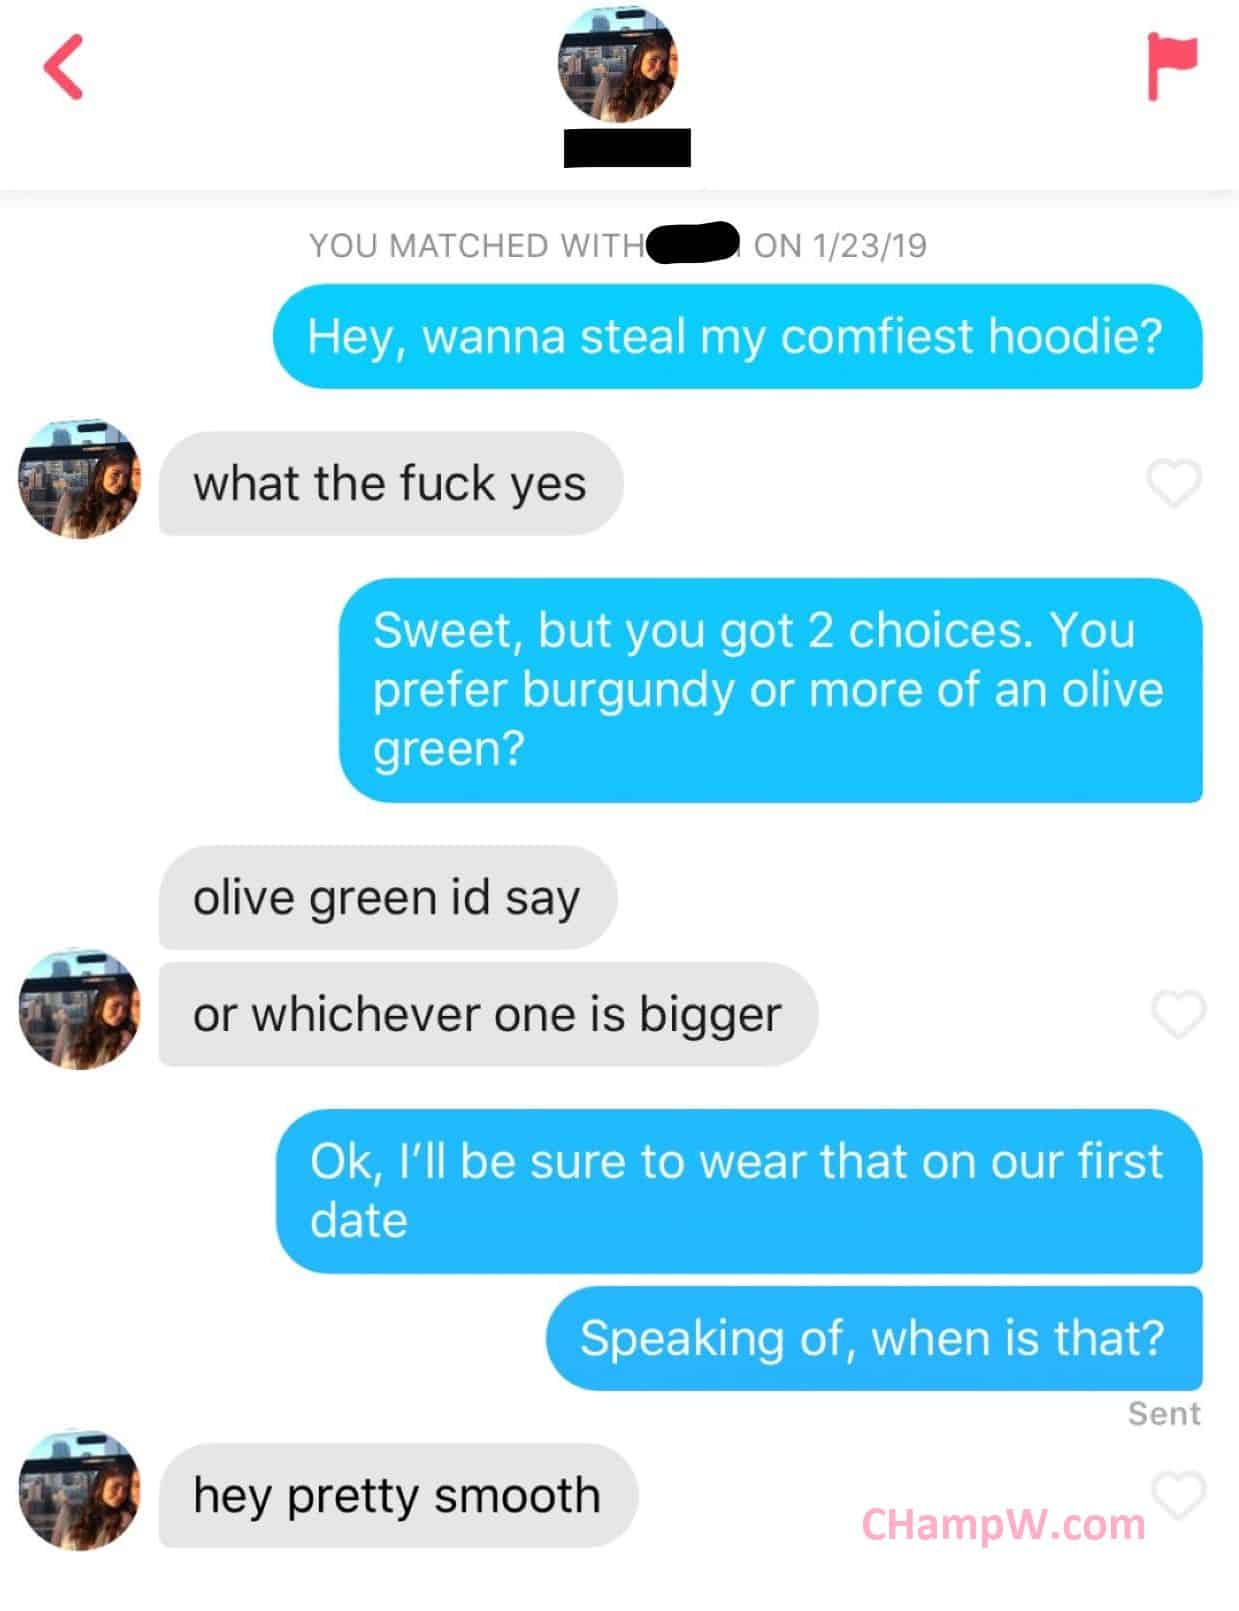 100+ Best Tinder Pick up Lines That Work Surprisingly in 2020